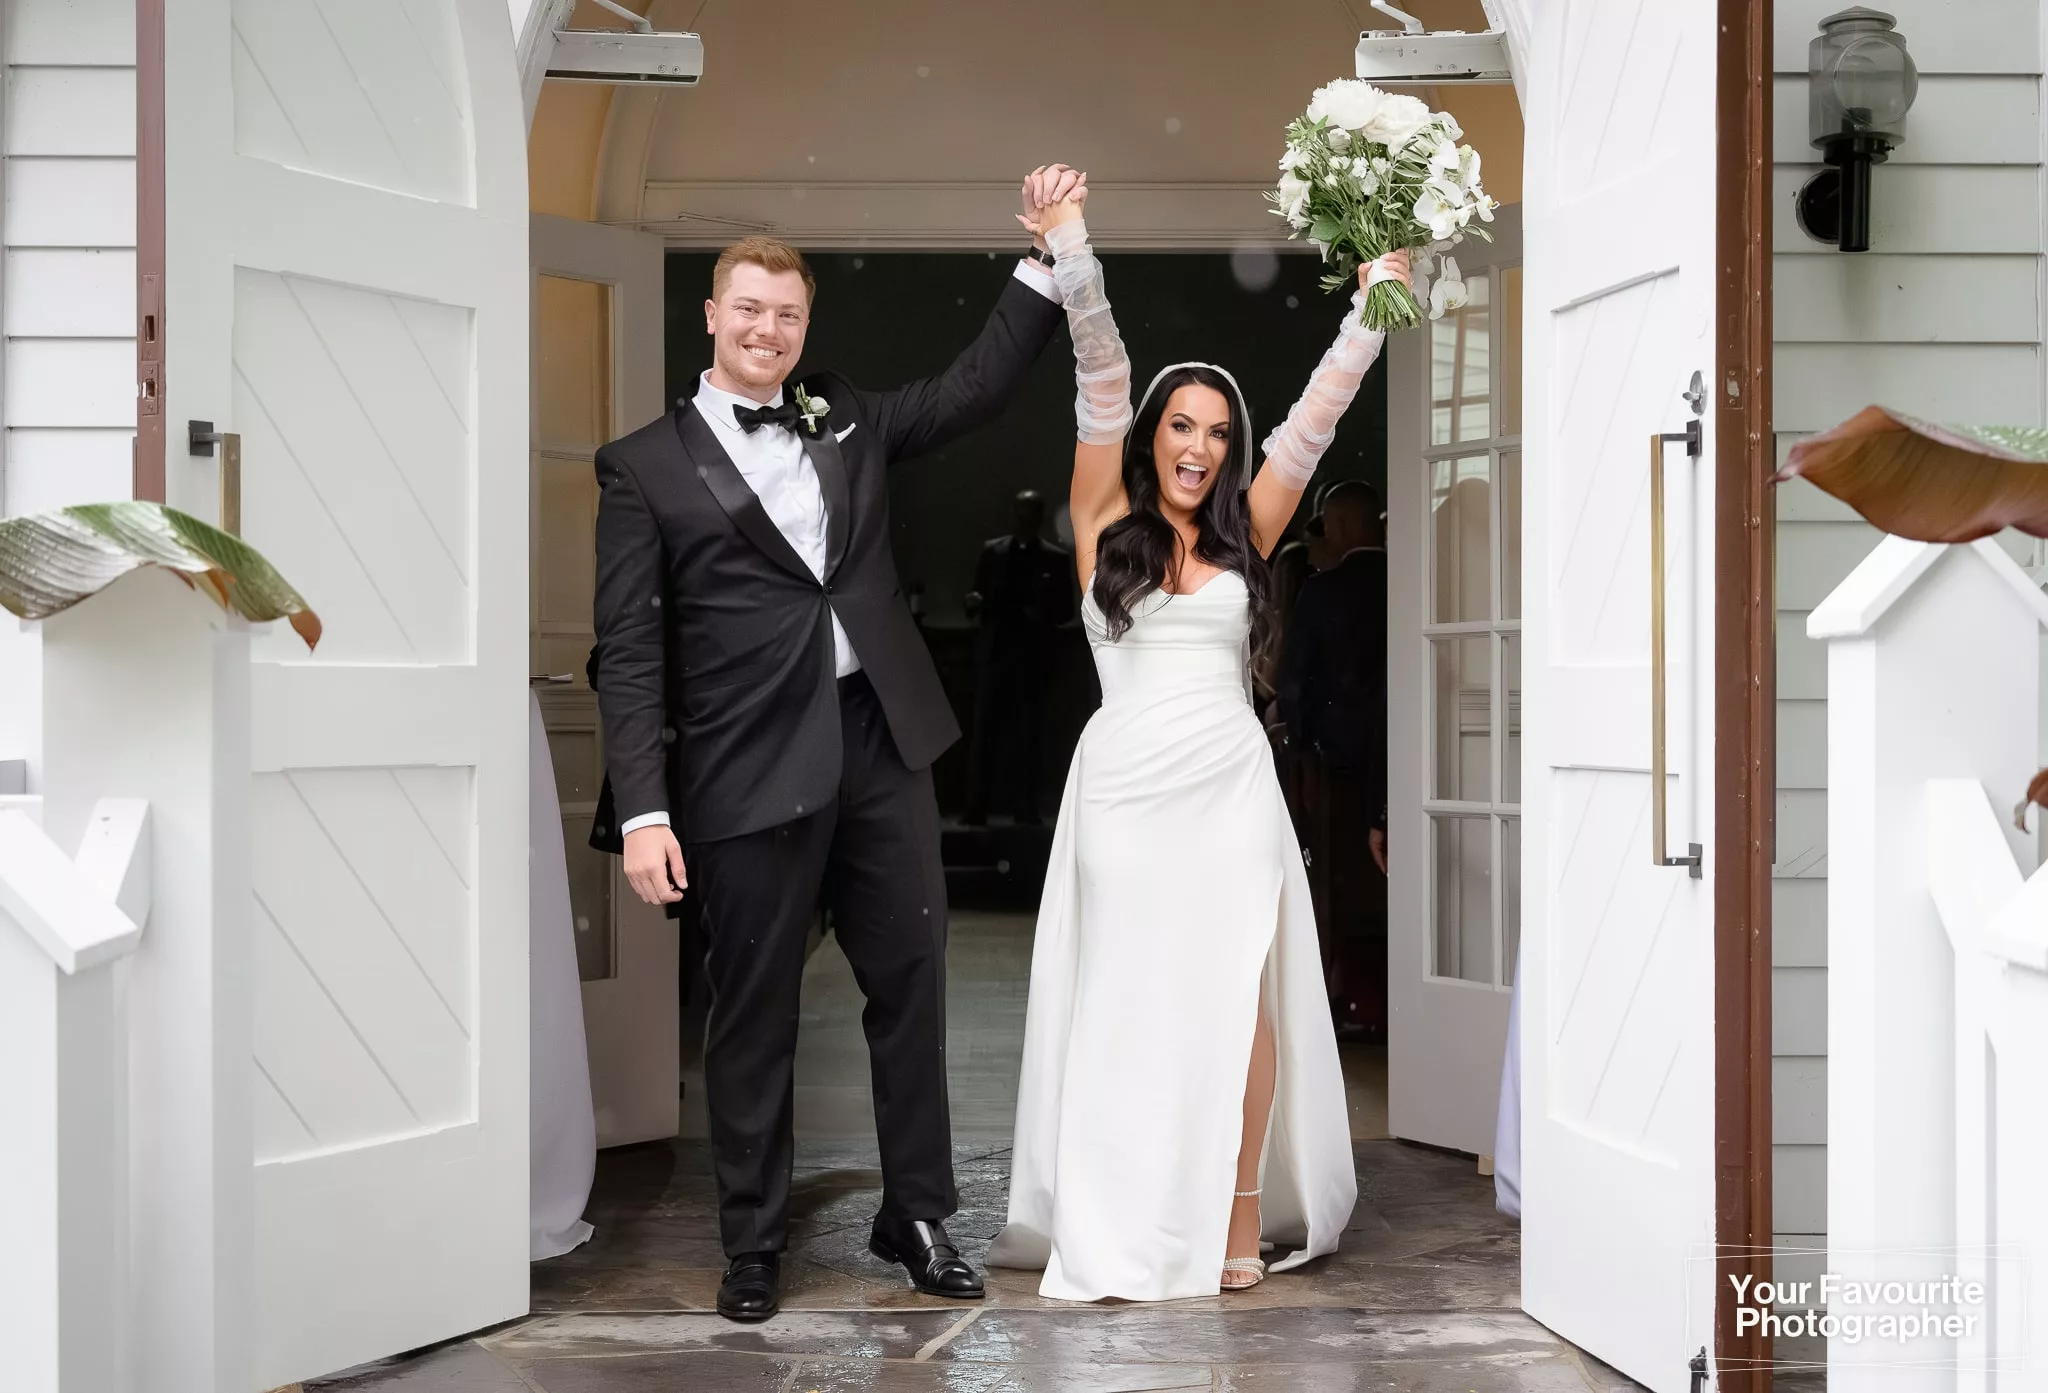 At The Doctor's House chapel, Samantha and Robert celebrate their wedding in the doorway with their arms raised